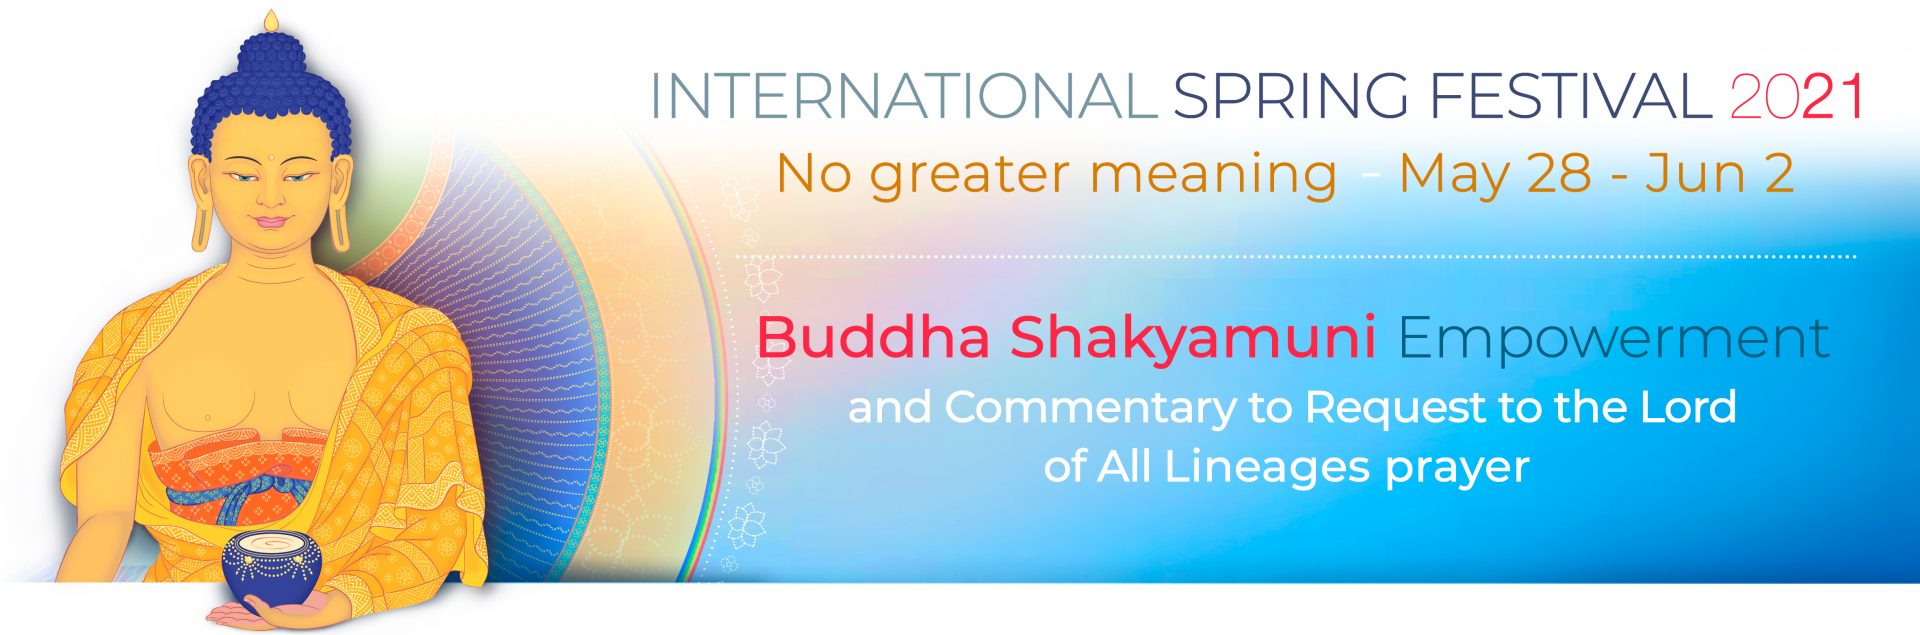 Why I am attending the Spring Festival - Kadampa Buddhism